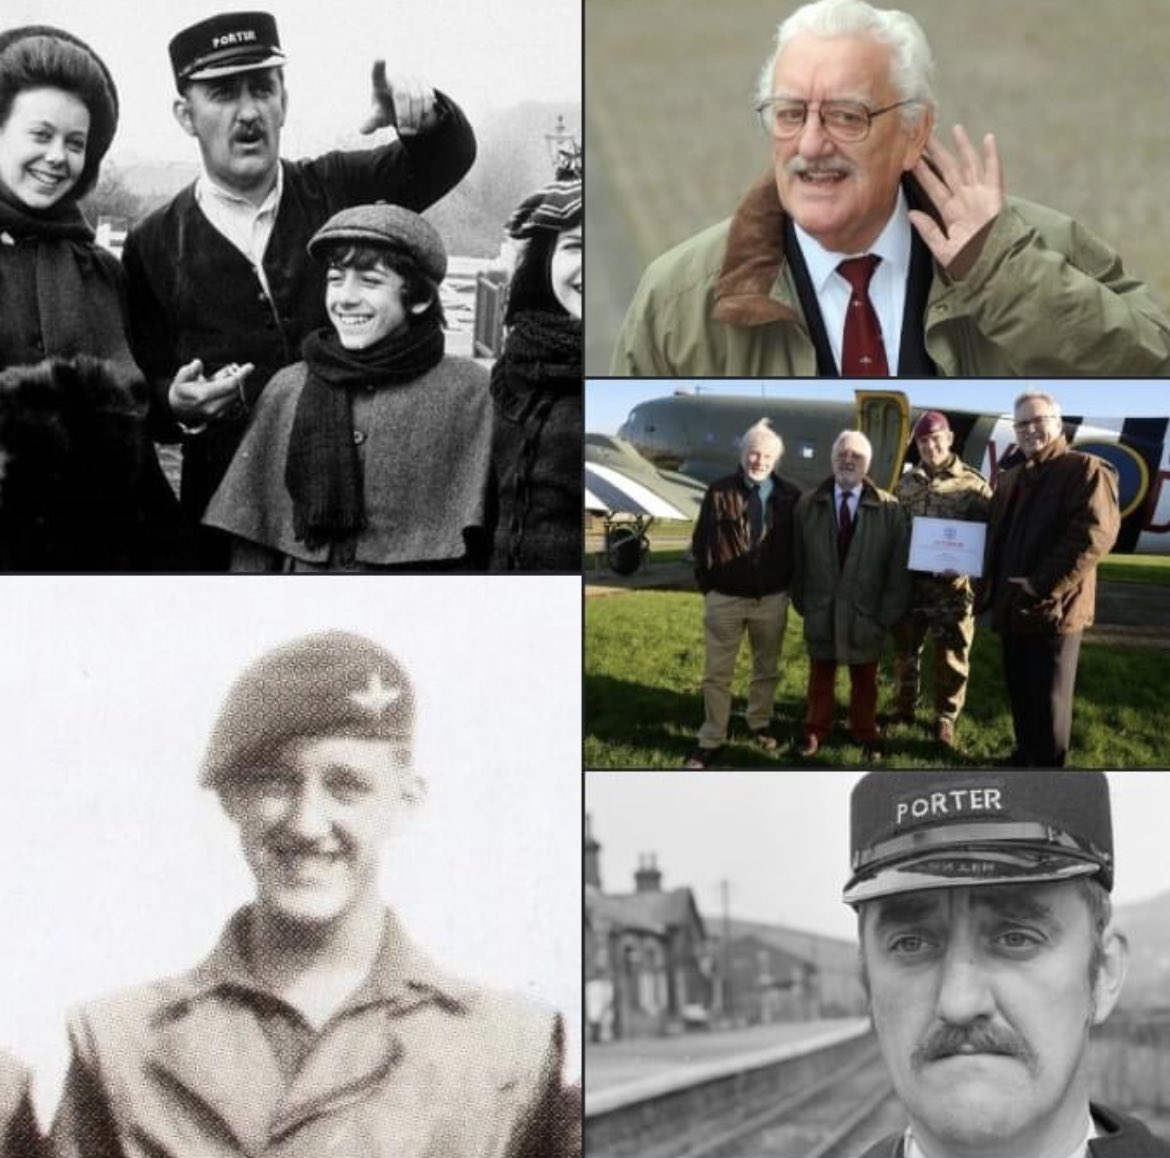 Military History - Did You Know - Bernard Cribbins OBE

🧵1/10. Cribbins was a veteran actor and paratrooper, star of The Railway Children, Carry On Films, Doctor Who and voice of The Wombles, has sadly passed away aged 93, 27 July 2022.

#TheParachuteRegiment